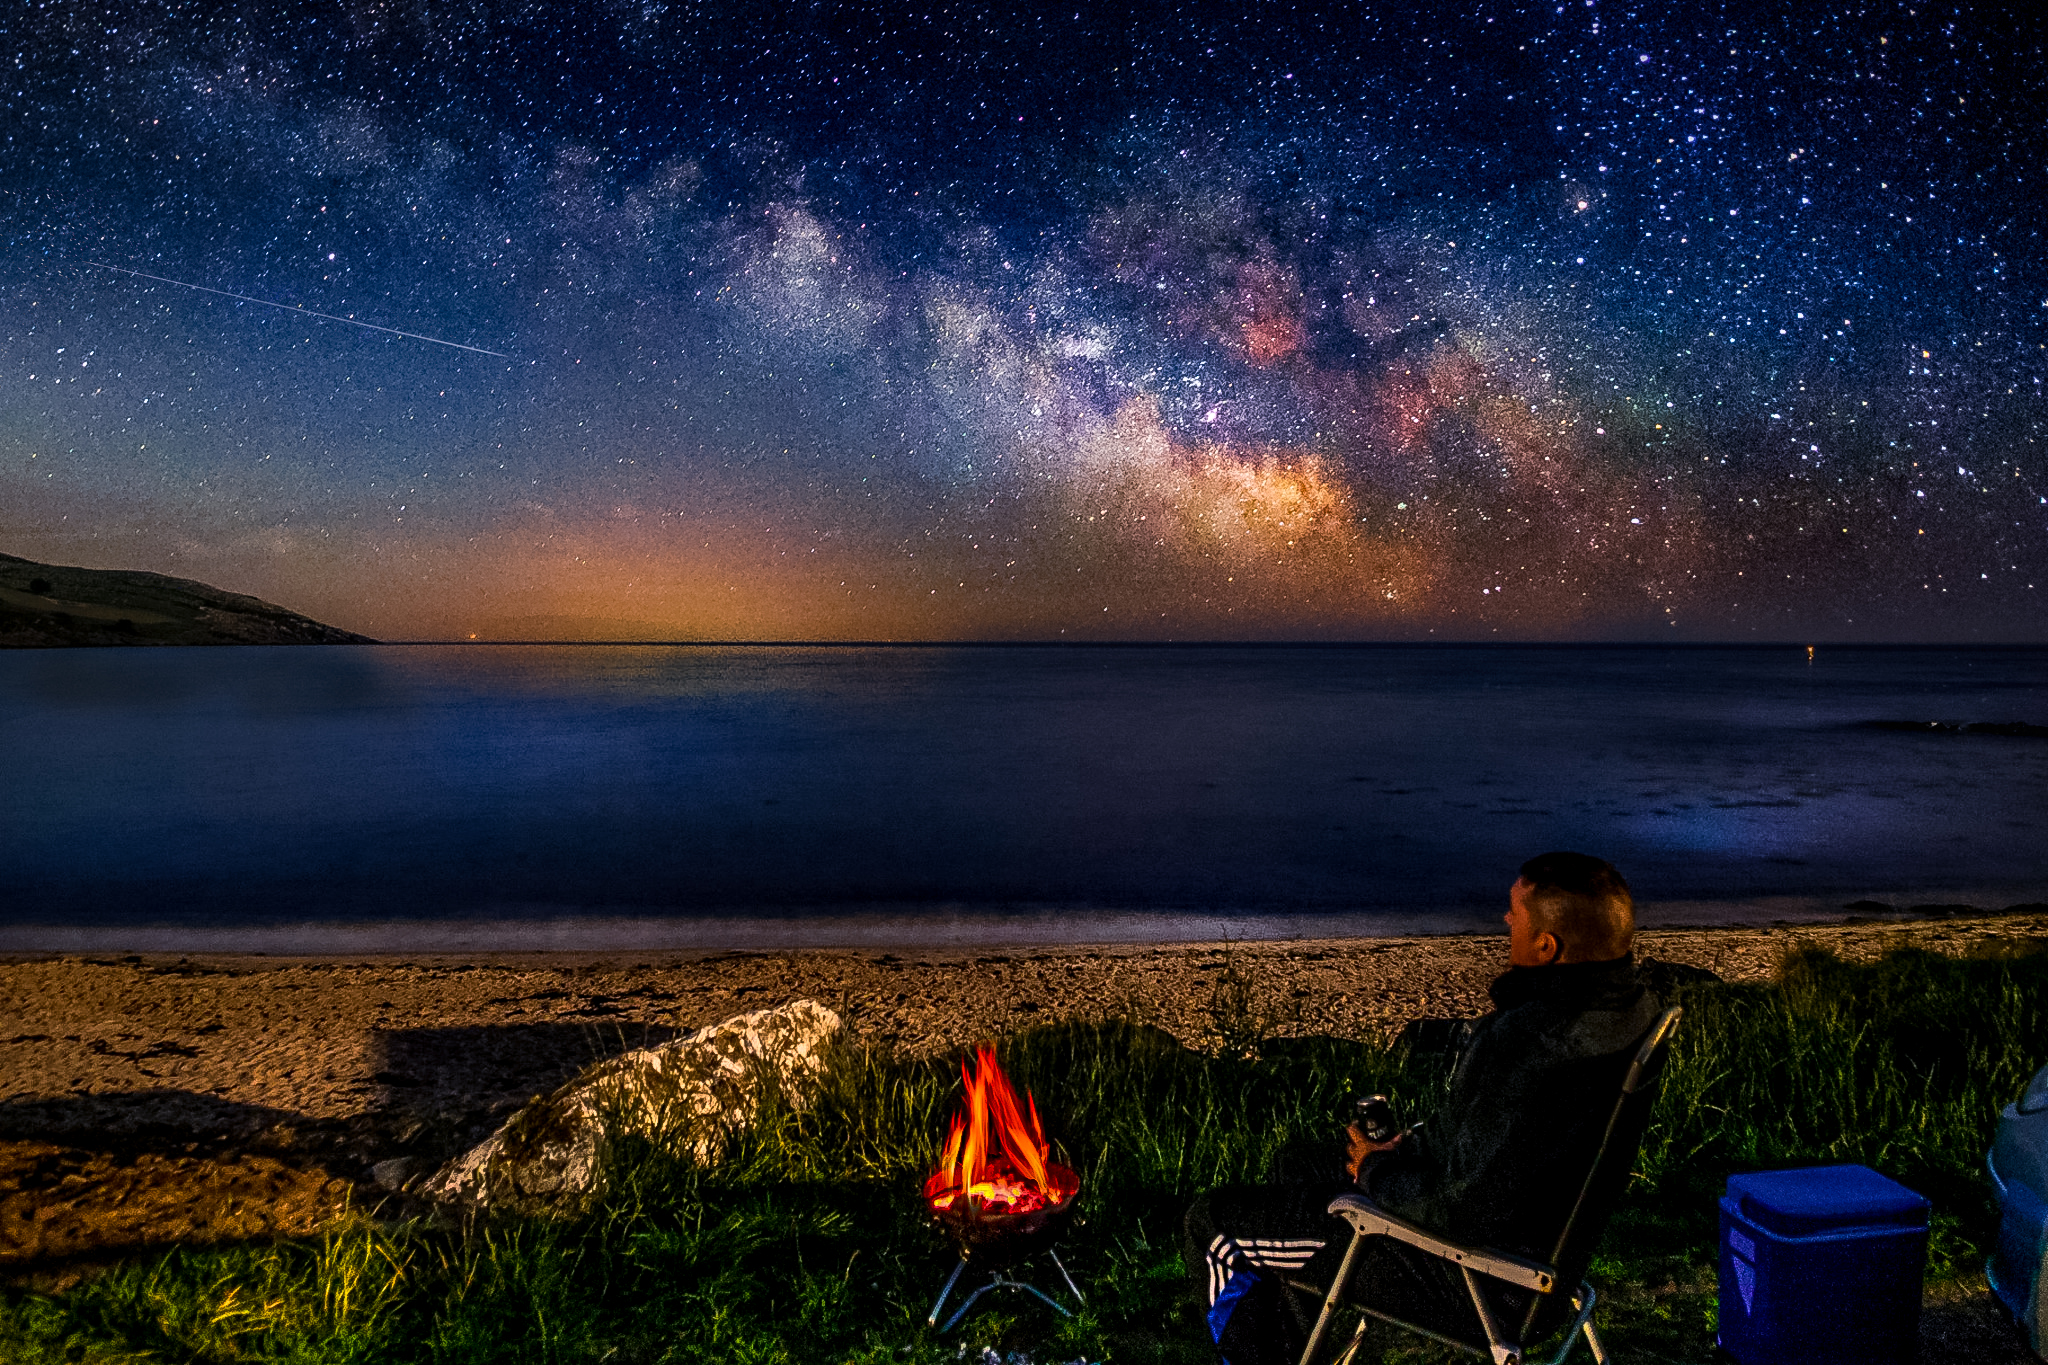 2nd Place Milky Way from the north coast of Ireland by Liam Hughes @LiamHughesBMZ